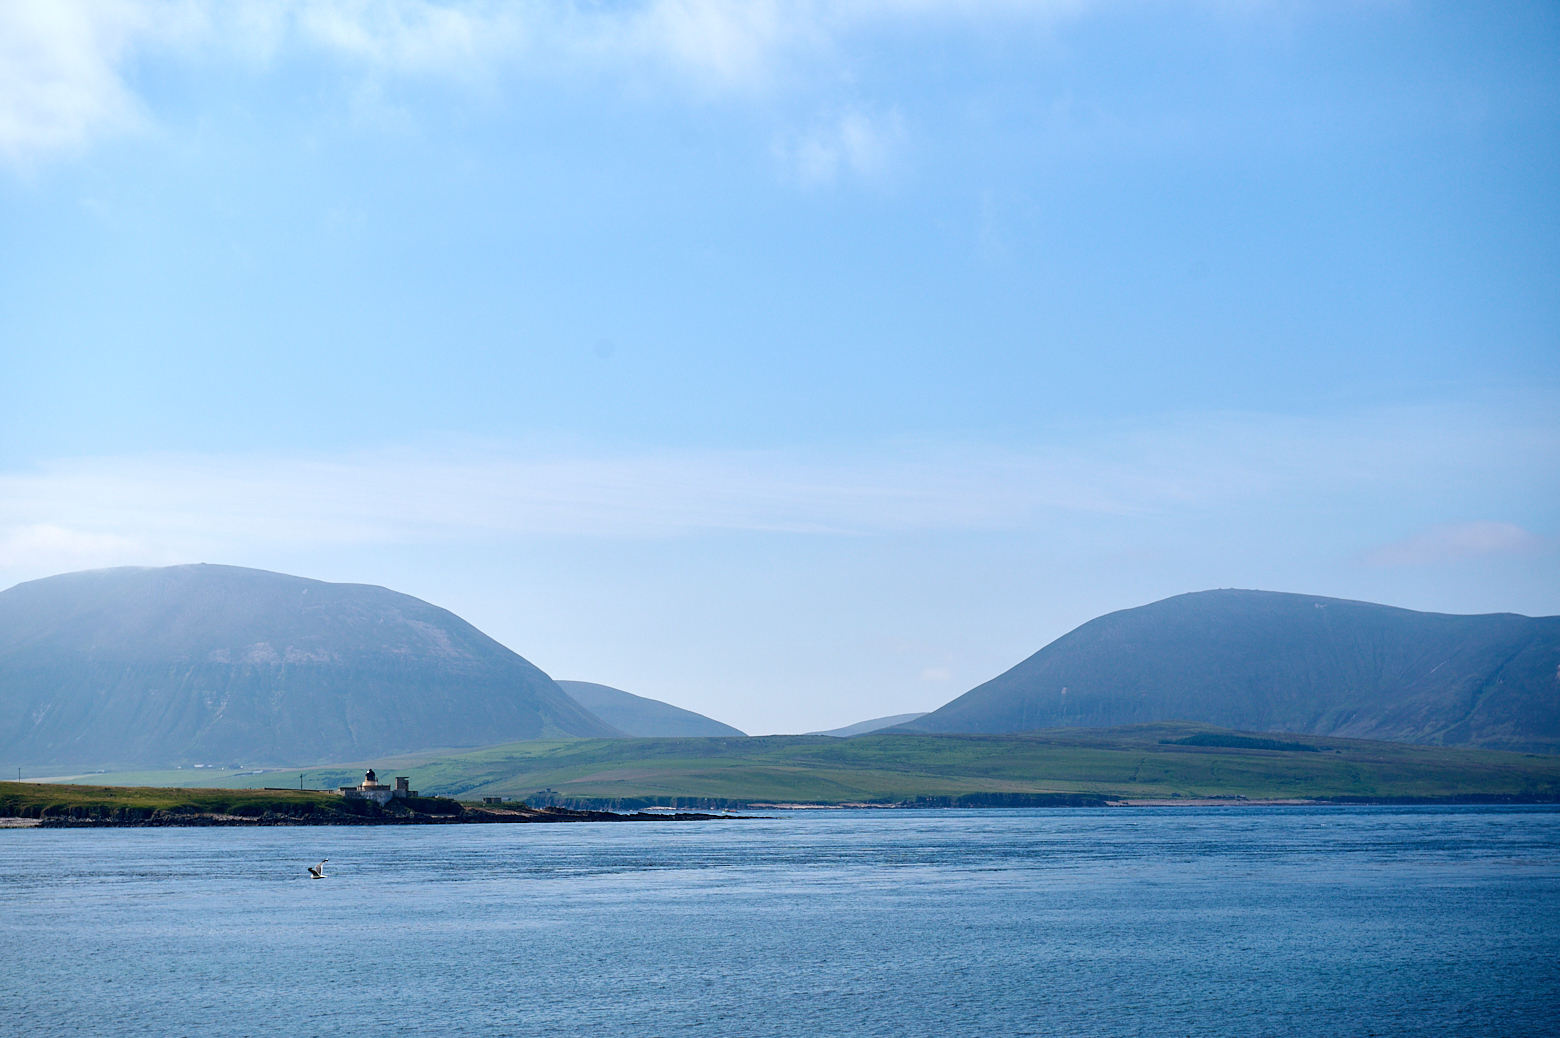 Walking from Stromness along the coast towards the Ness battery.